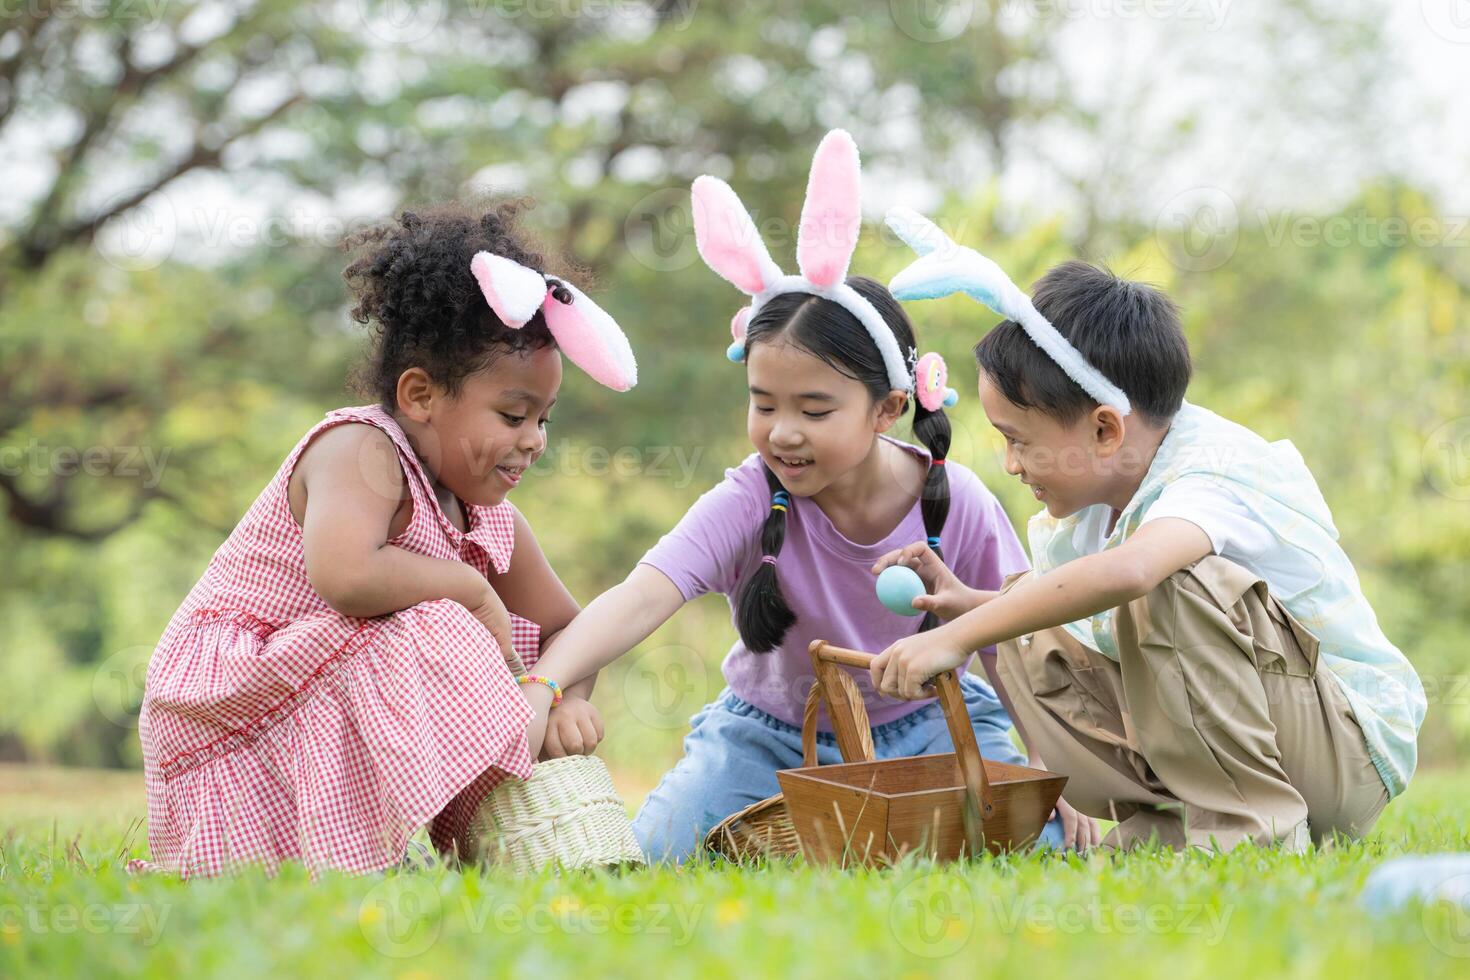 Children enjoying outdoor activities in the park including a run to collect beautiful Easter eggs. photo